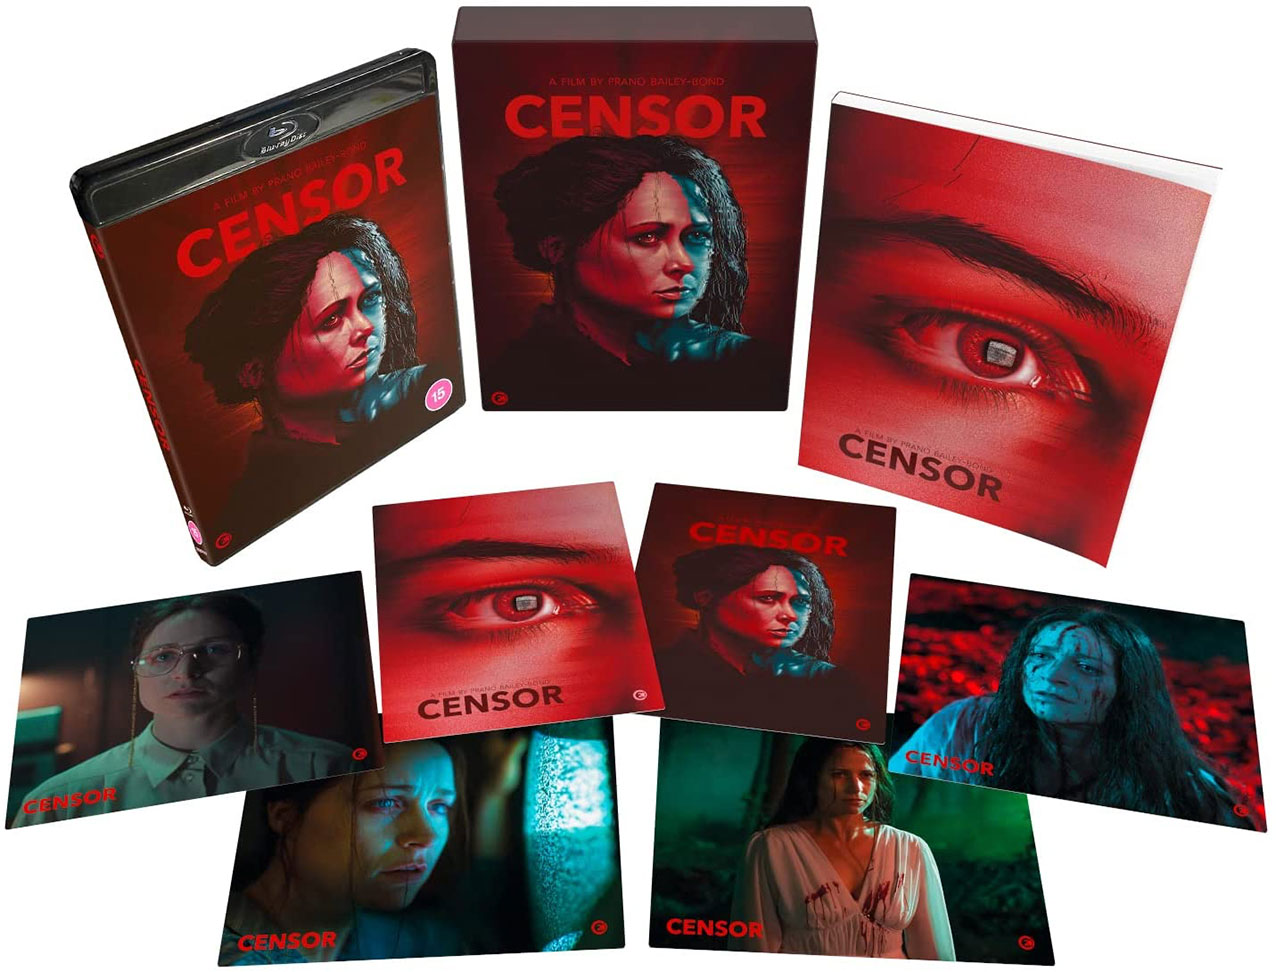 Censor Limited Edition Blu-ray pack shot